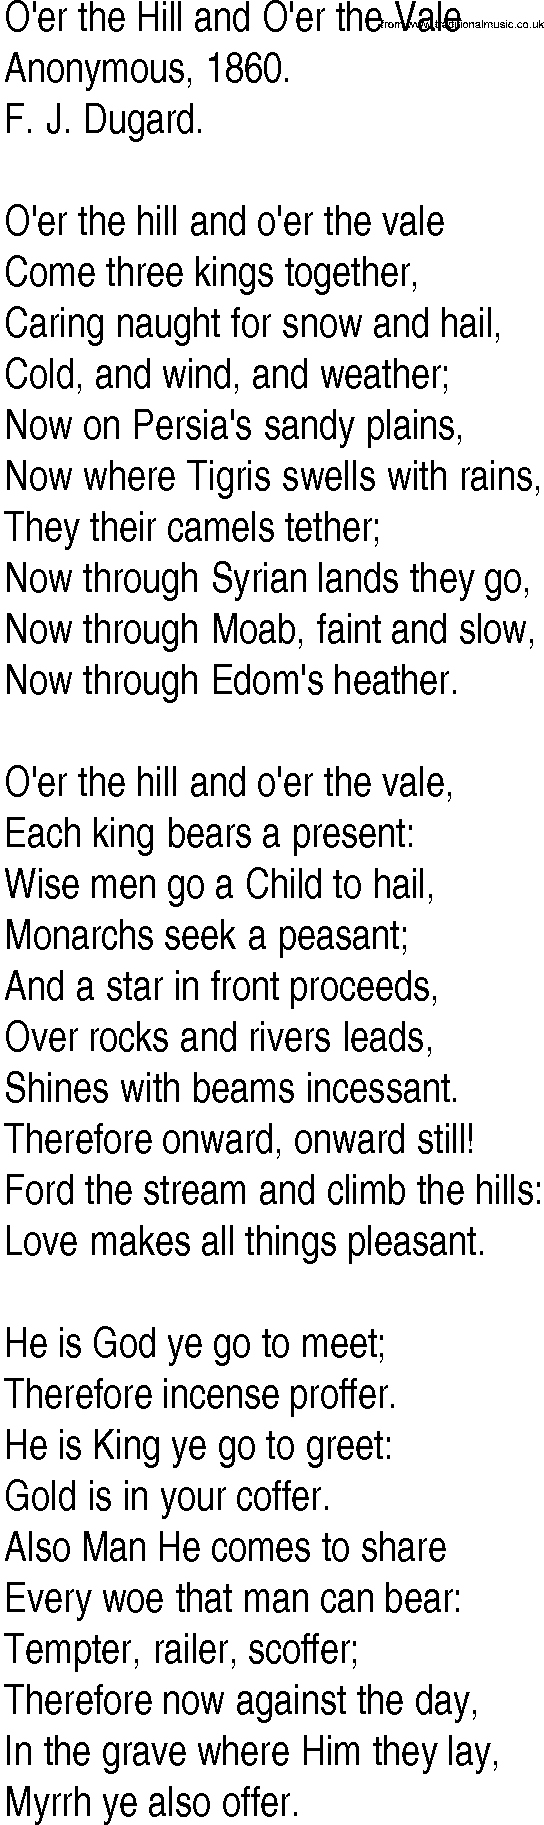 Hymn and Gospel Song: O'er the Hill and O'er the Vale by Anonymous lyrics